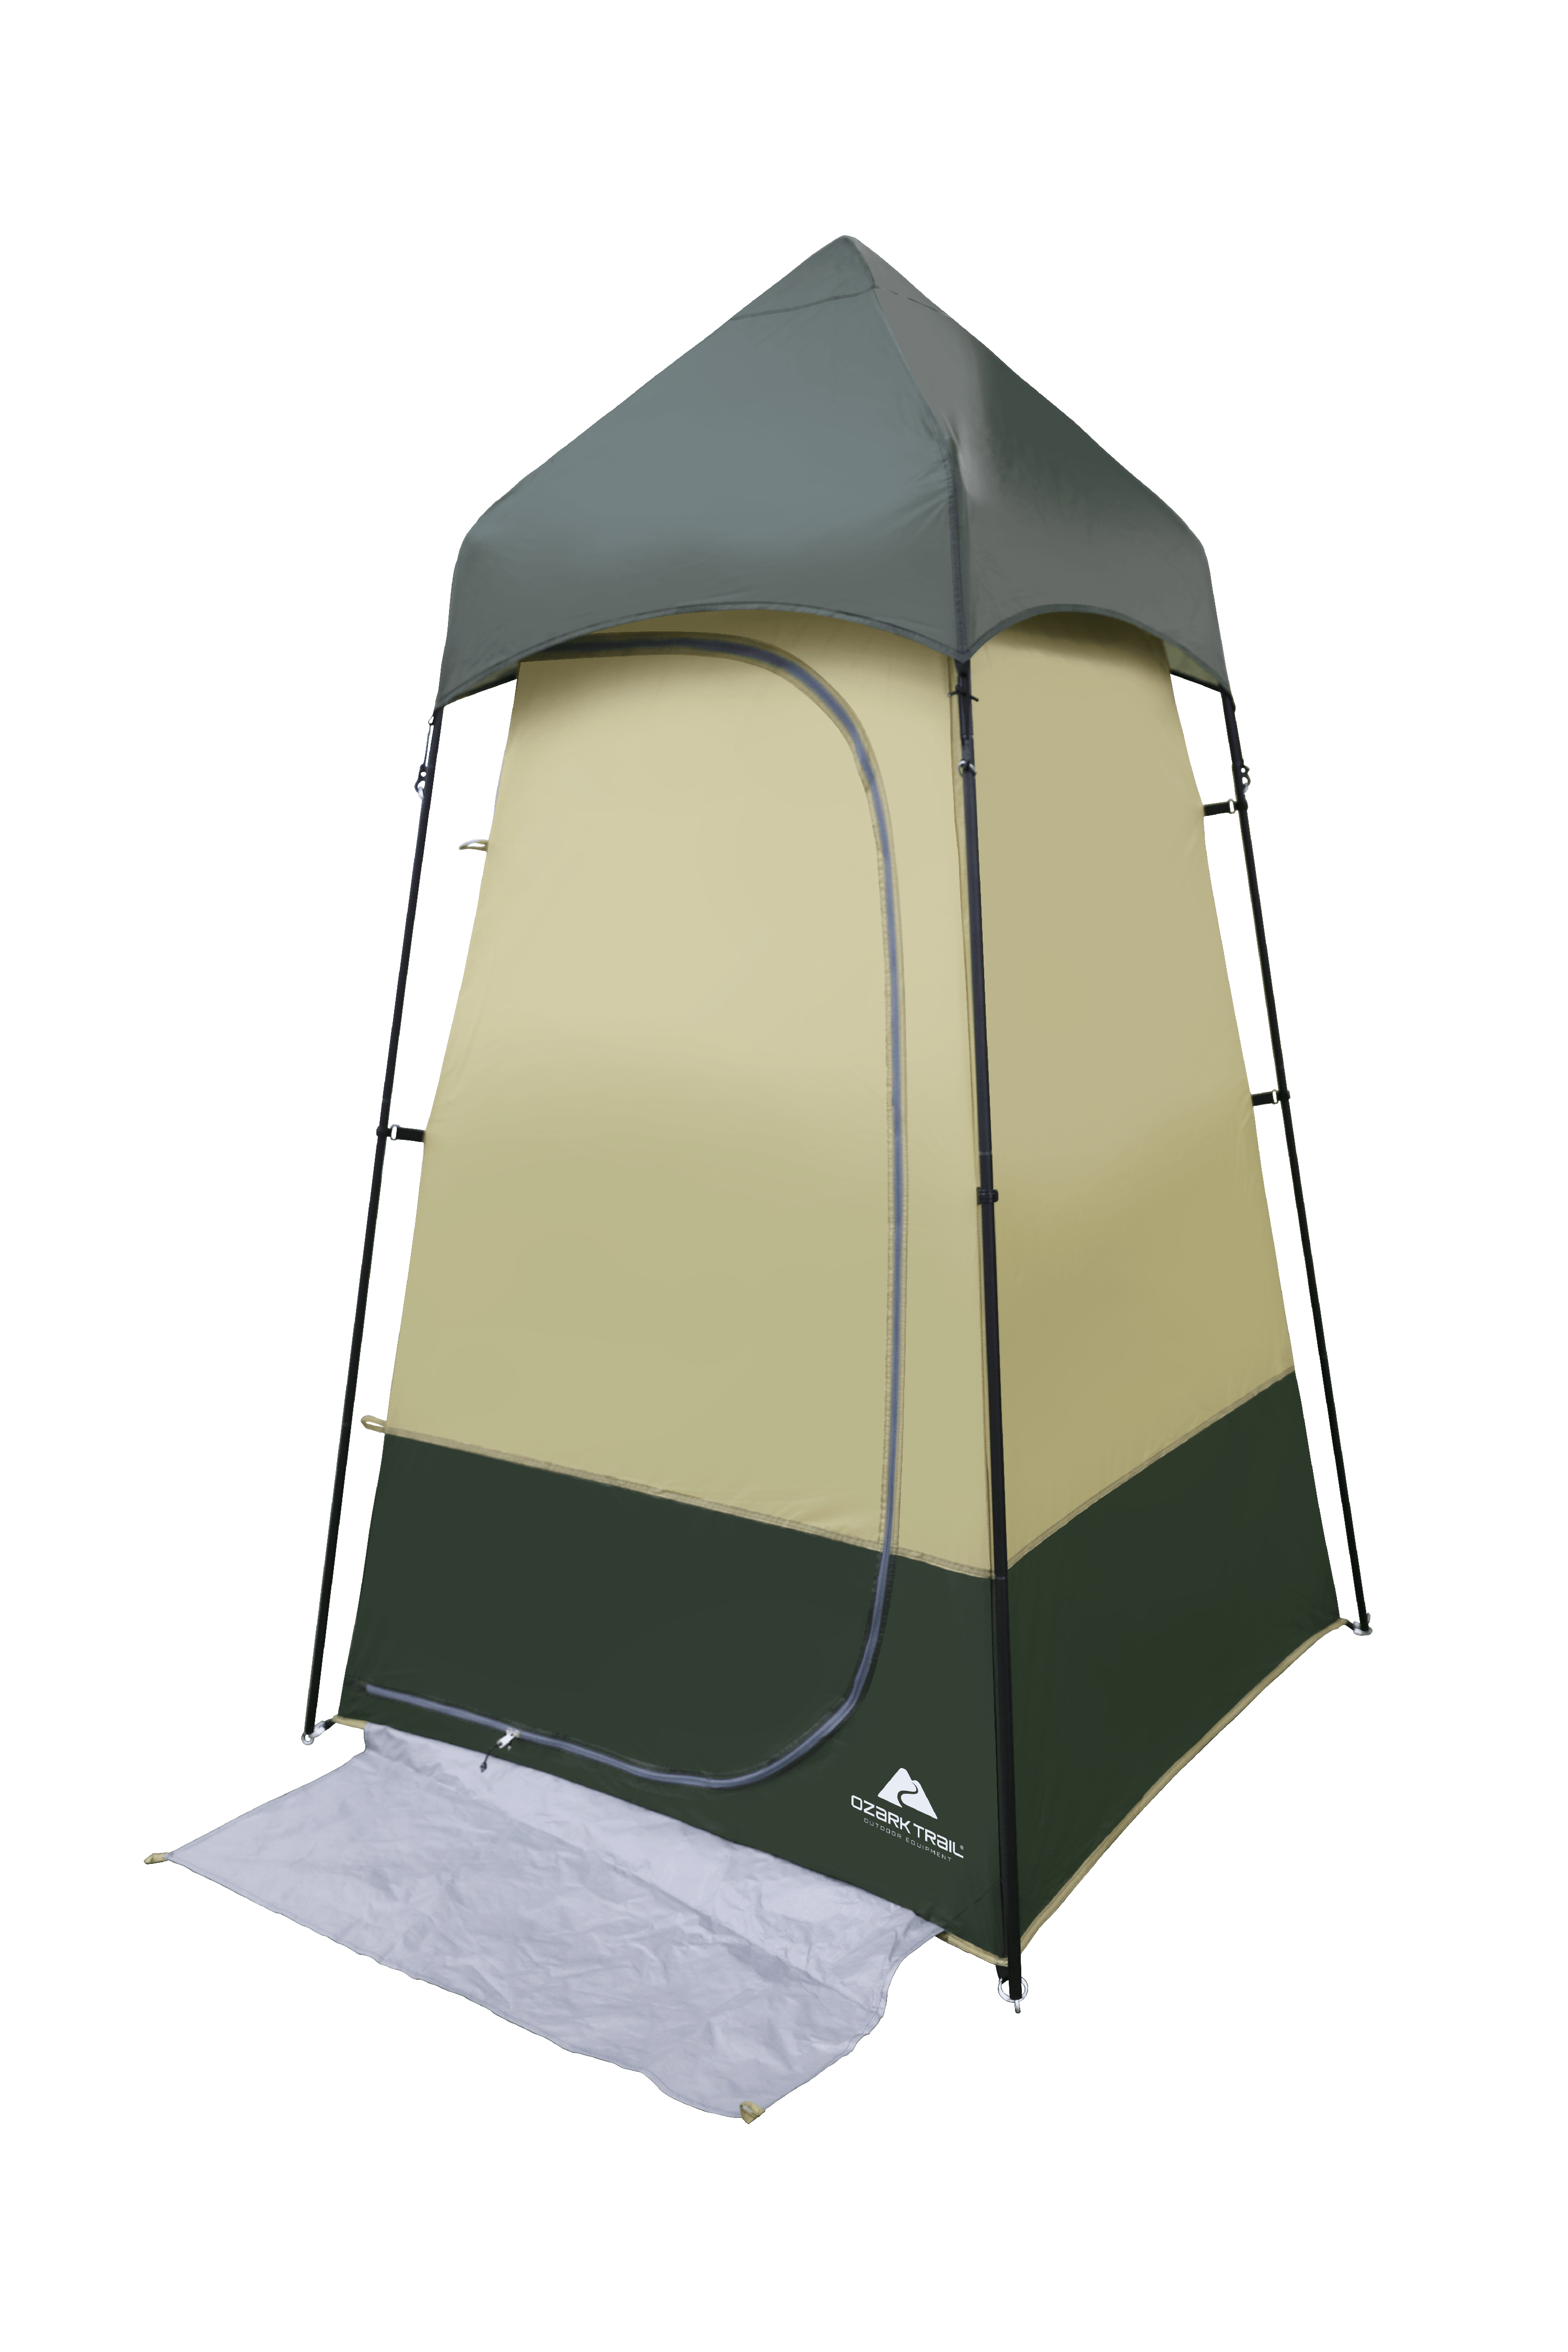 Ozark Trail Hazel Creek Lighted Privacy Tent One Room, Green - image 5 of 10